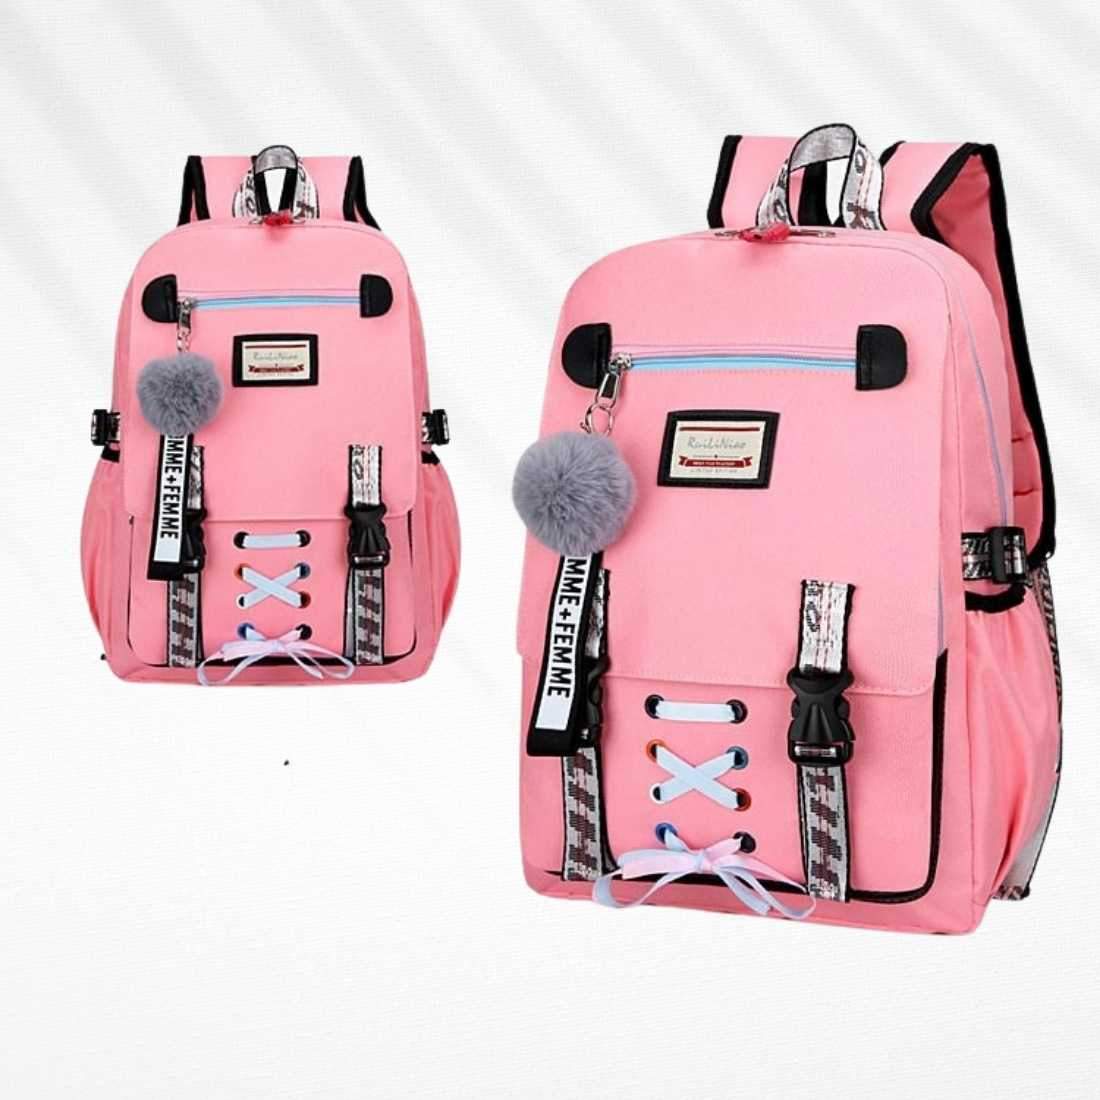 Pink foam new style college bags baby pink new styles callage travel girls  bags low price and goods looks items Medium Size Fashion Backpack for Girls, Best Gifts for Girls